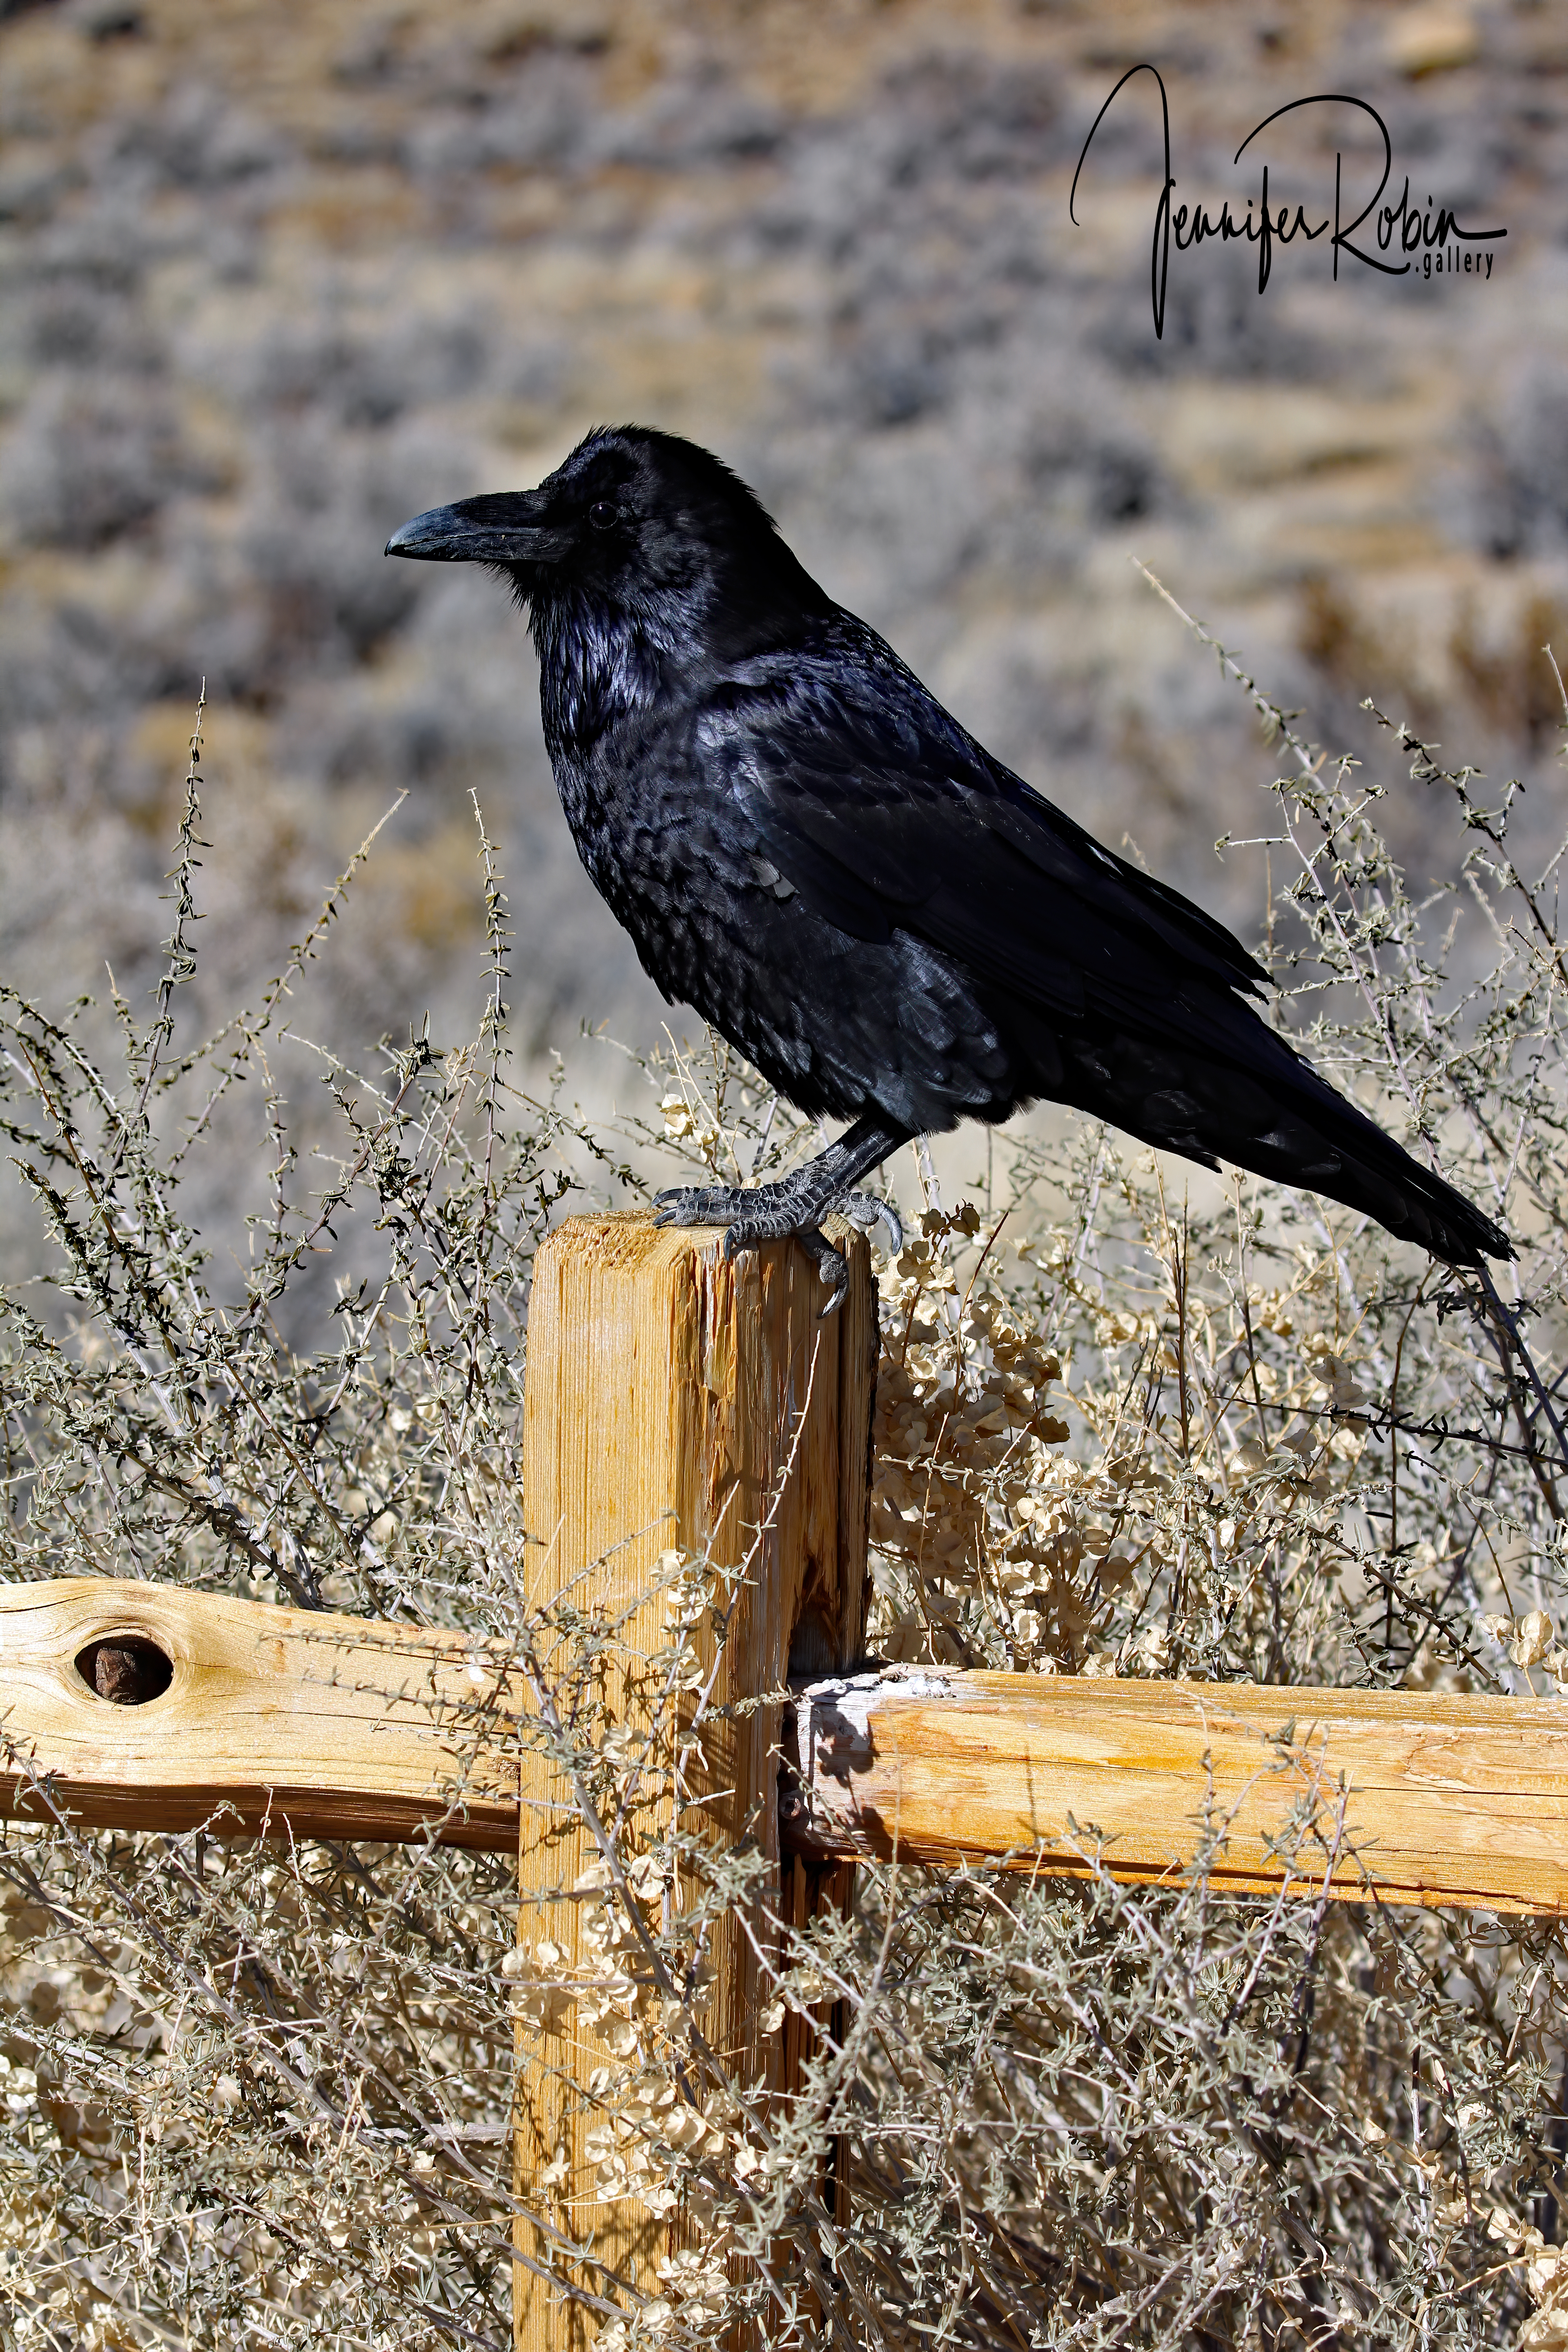 A black Northern Raven at Chaco Canyon in Nageezi, NM